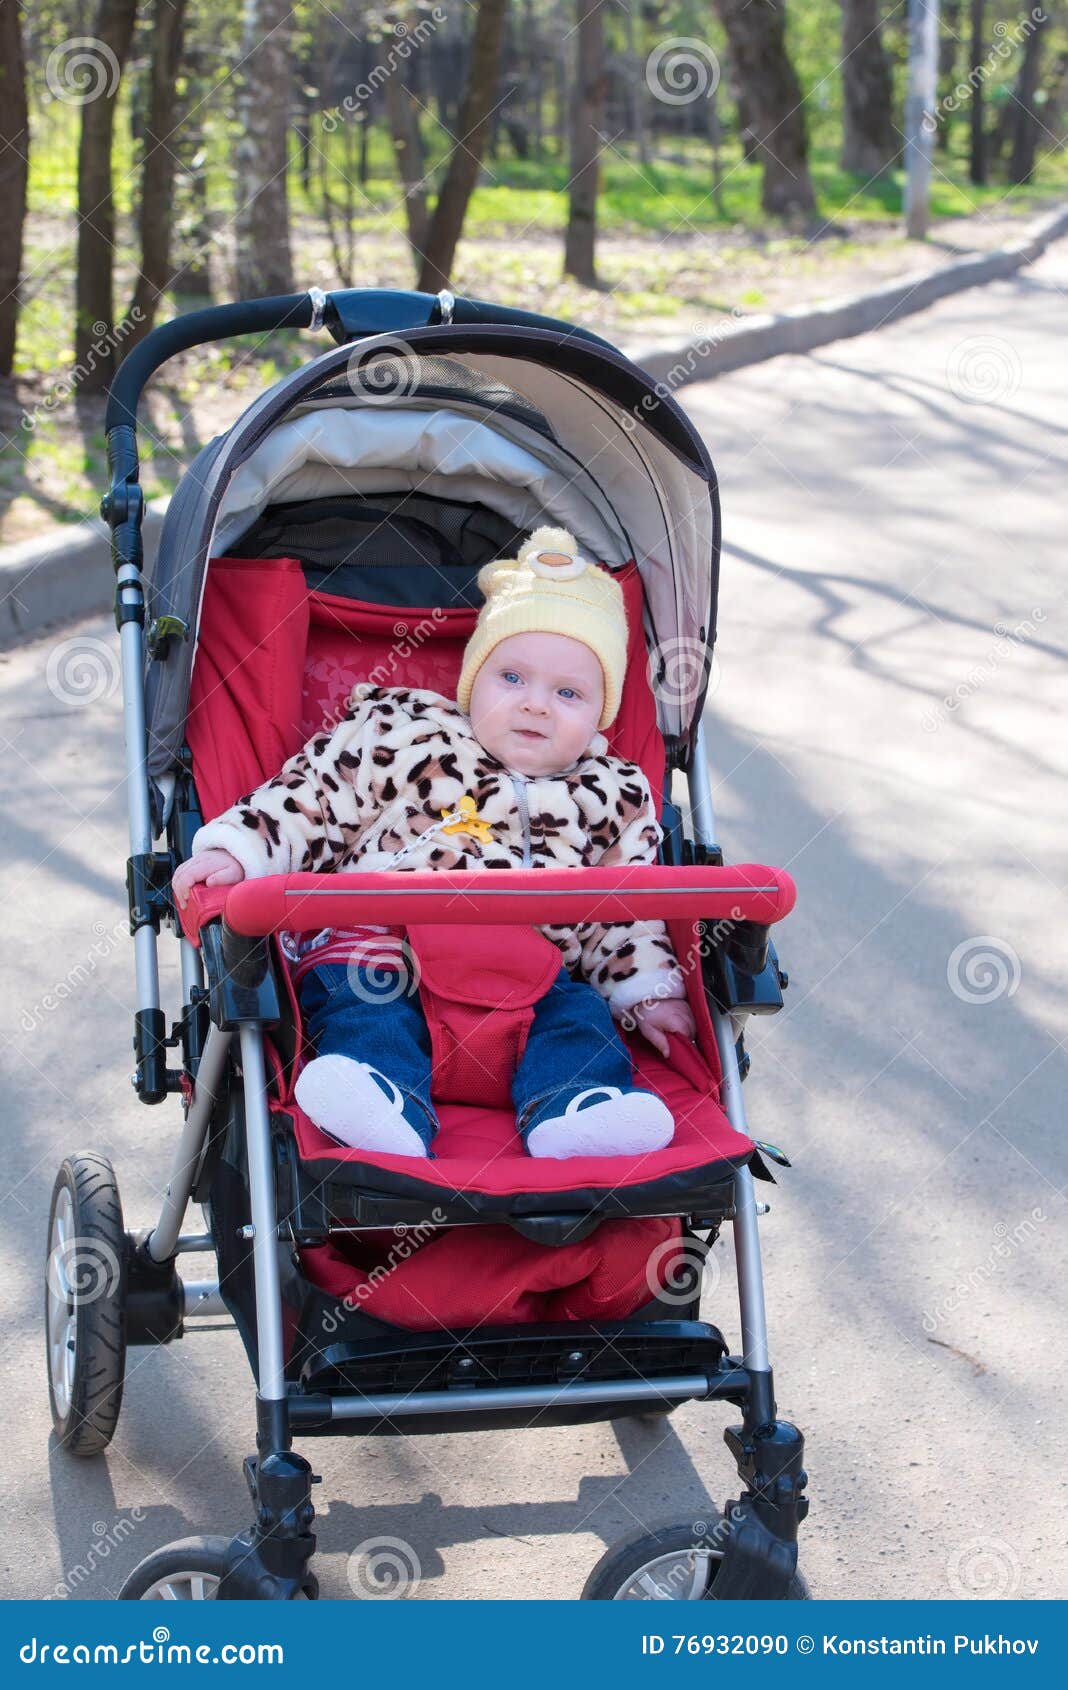 Happy Baby Sitting in Stroller Stock Photo - Image of beautiful: 76932090